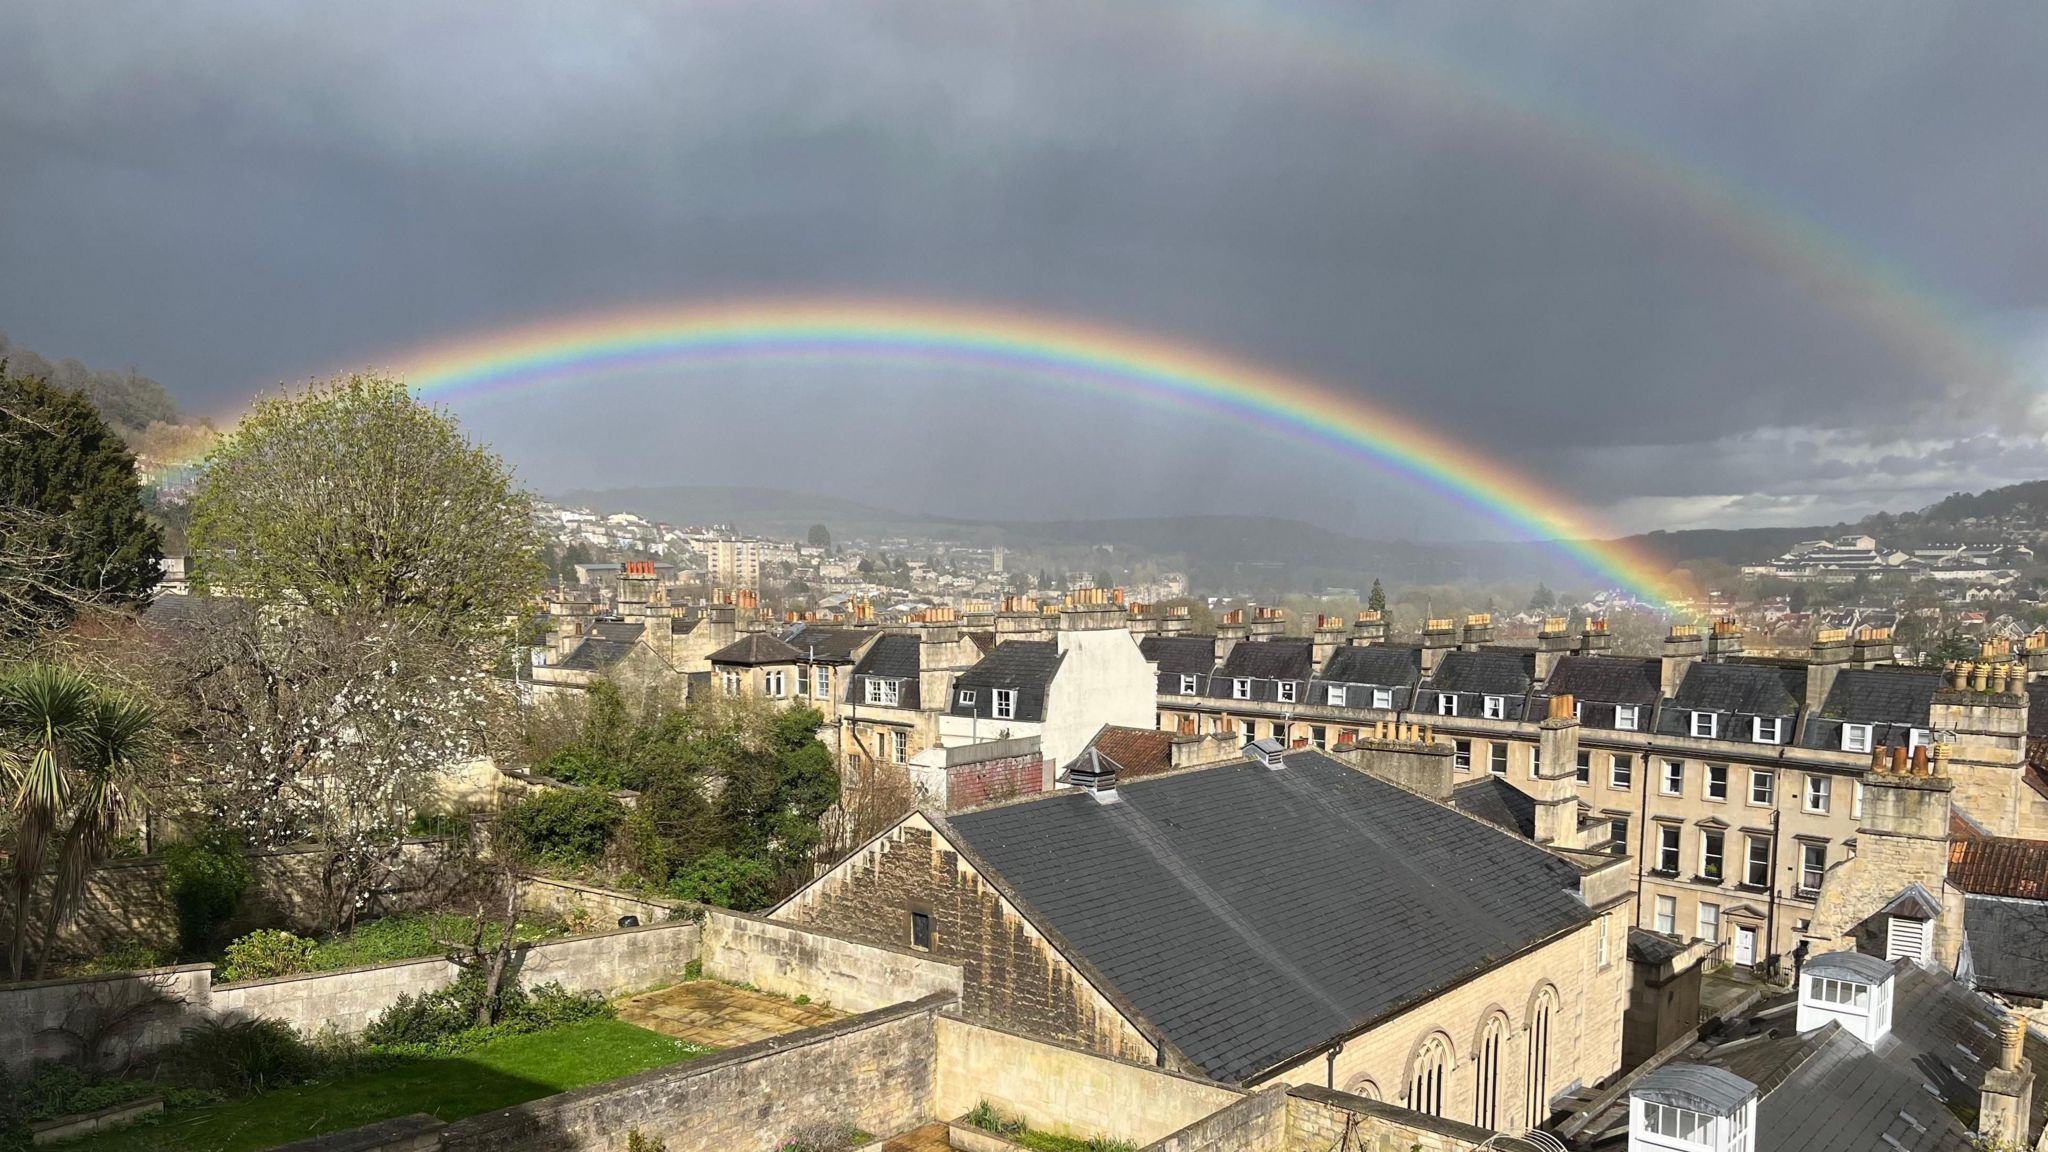 Double rainbow over the town of Bakewell, Derbyshire. 